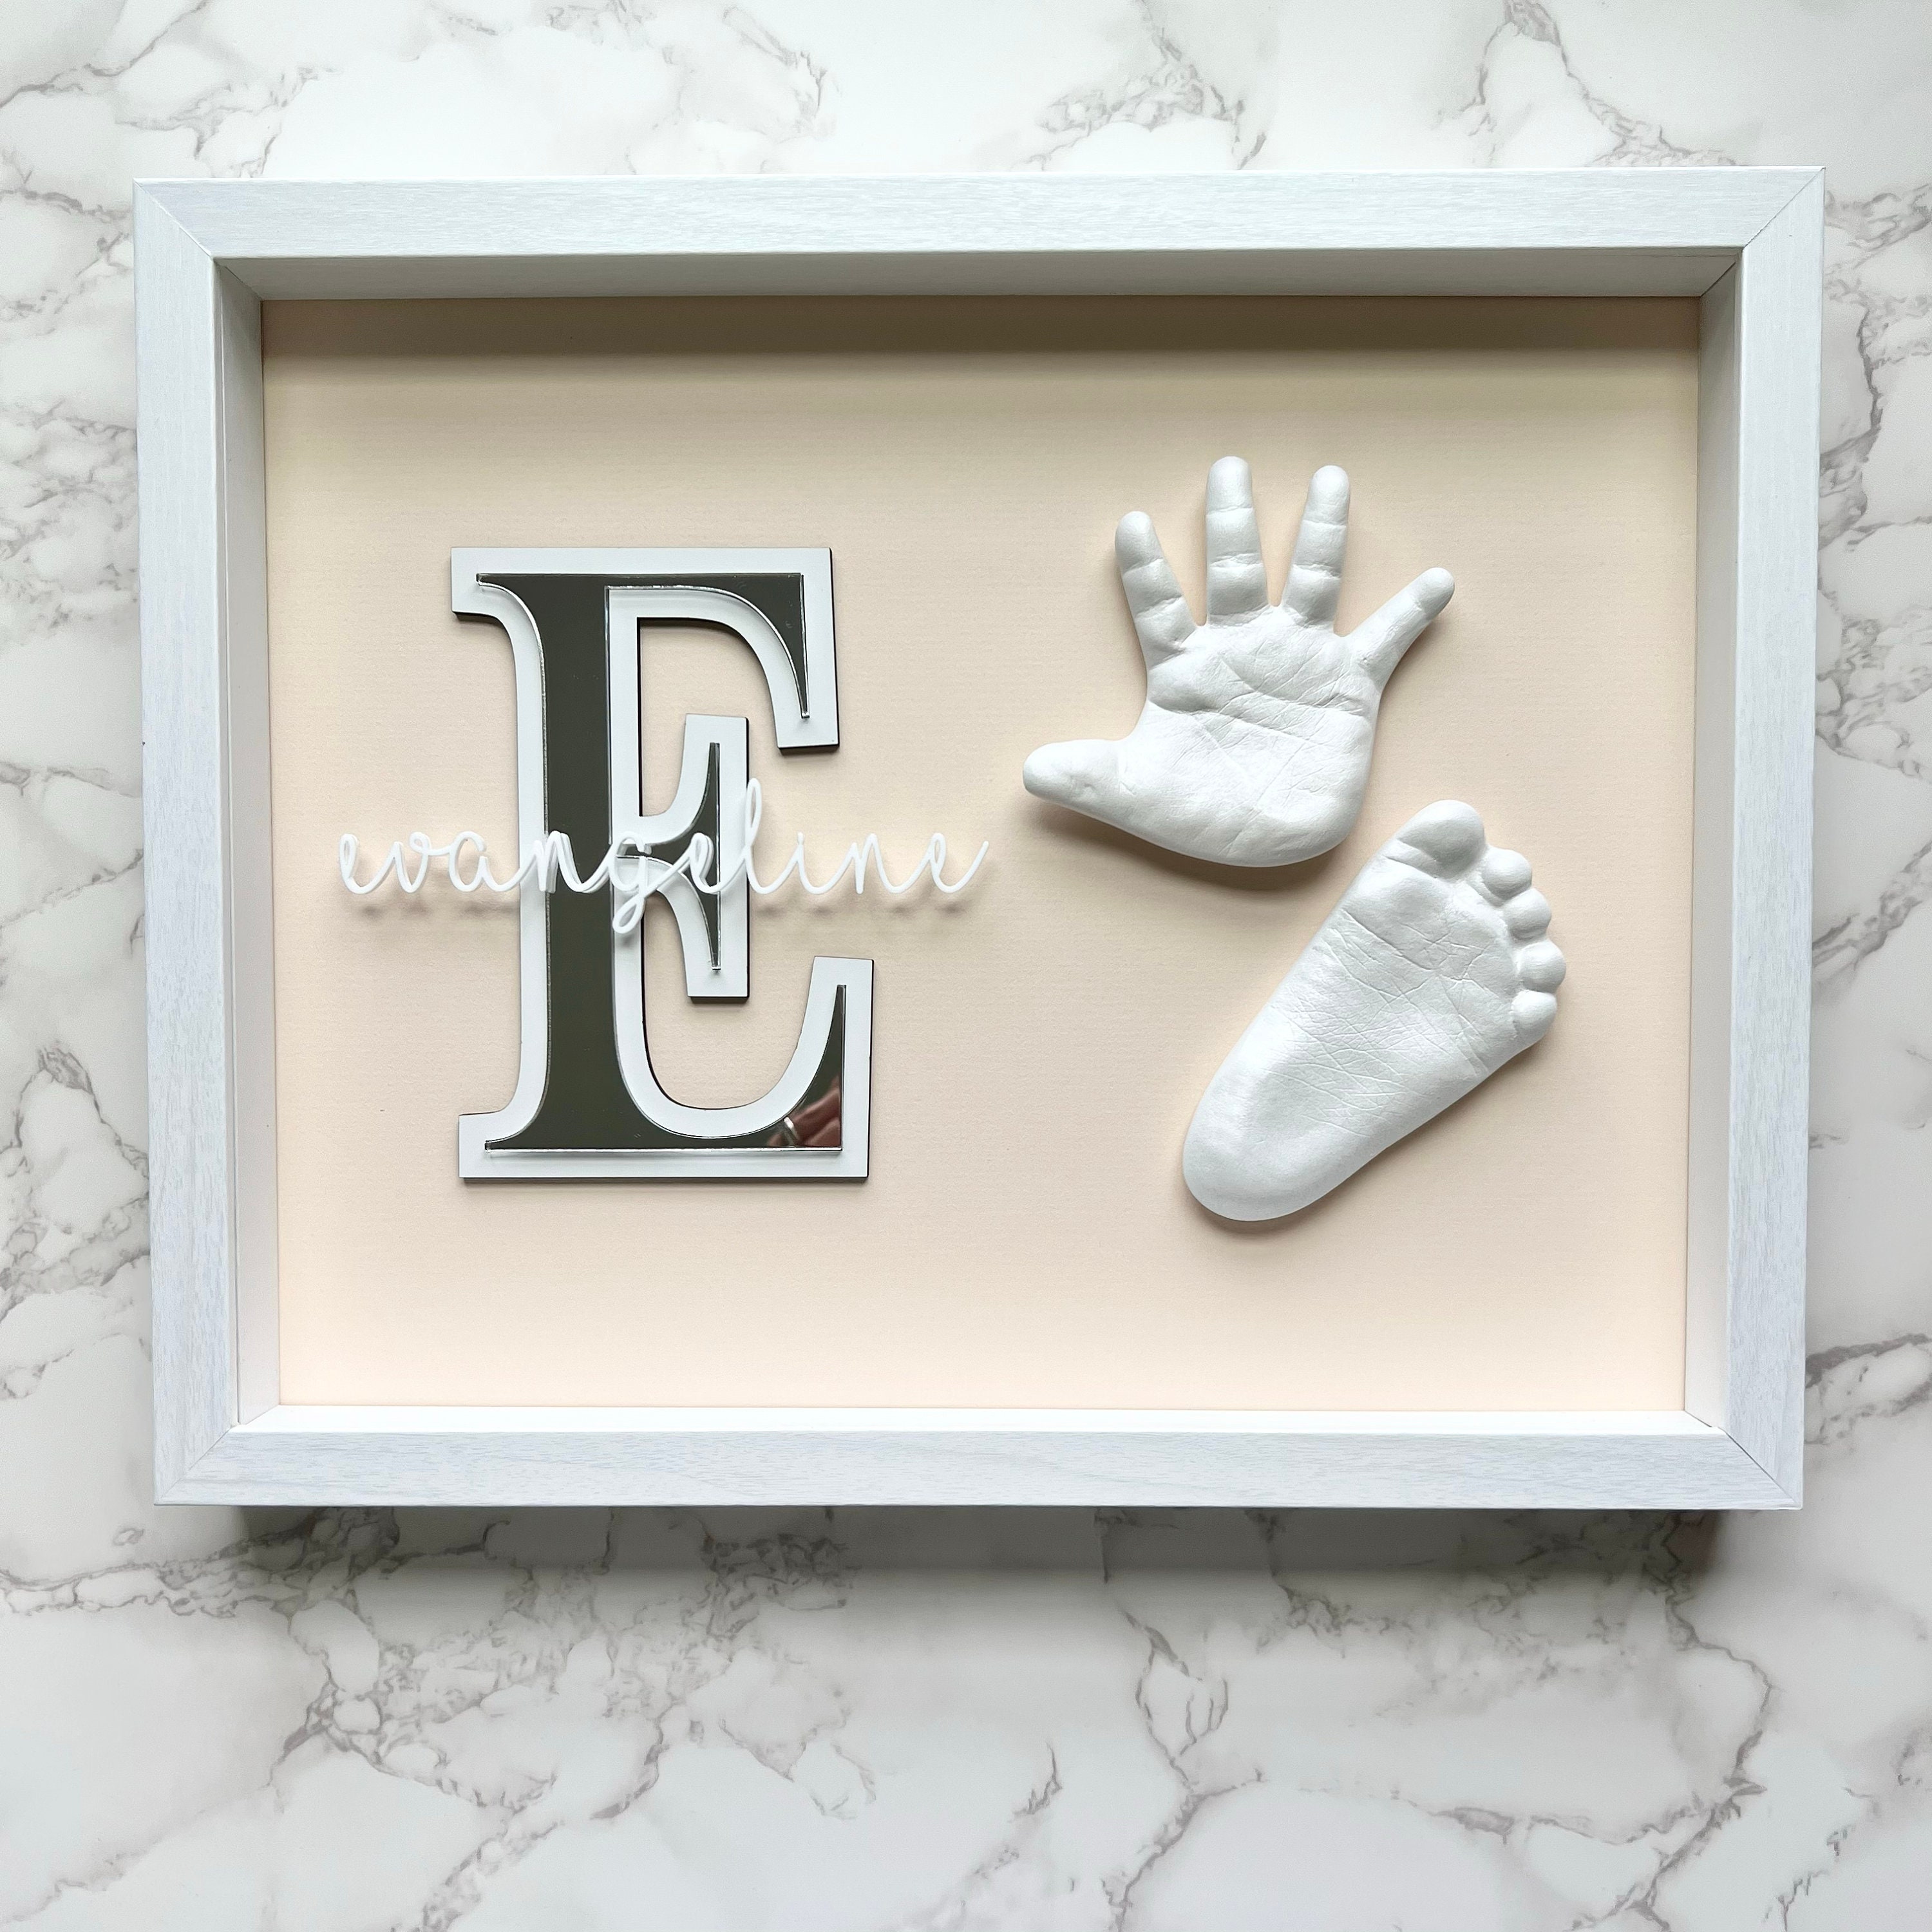 DIY Baby Hands and Feet Casting Kit, Newborn Hand and Foot Mold